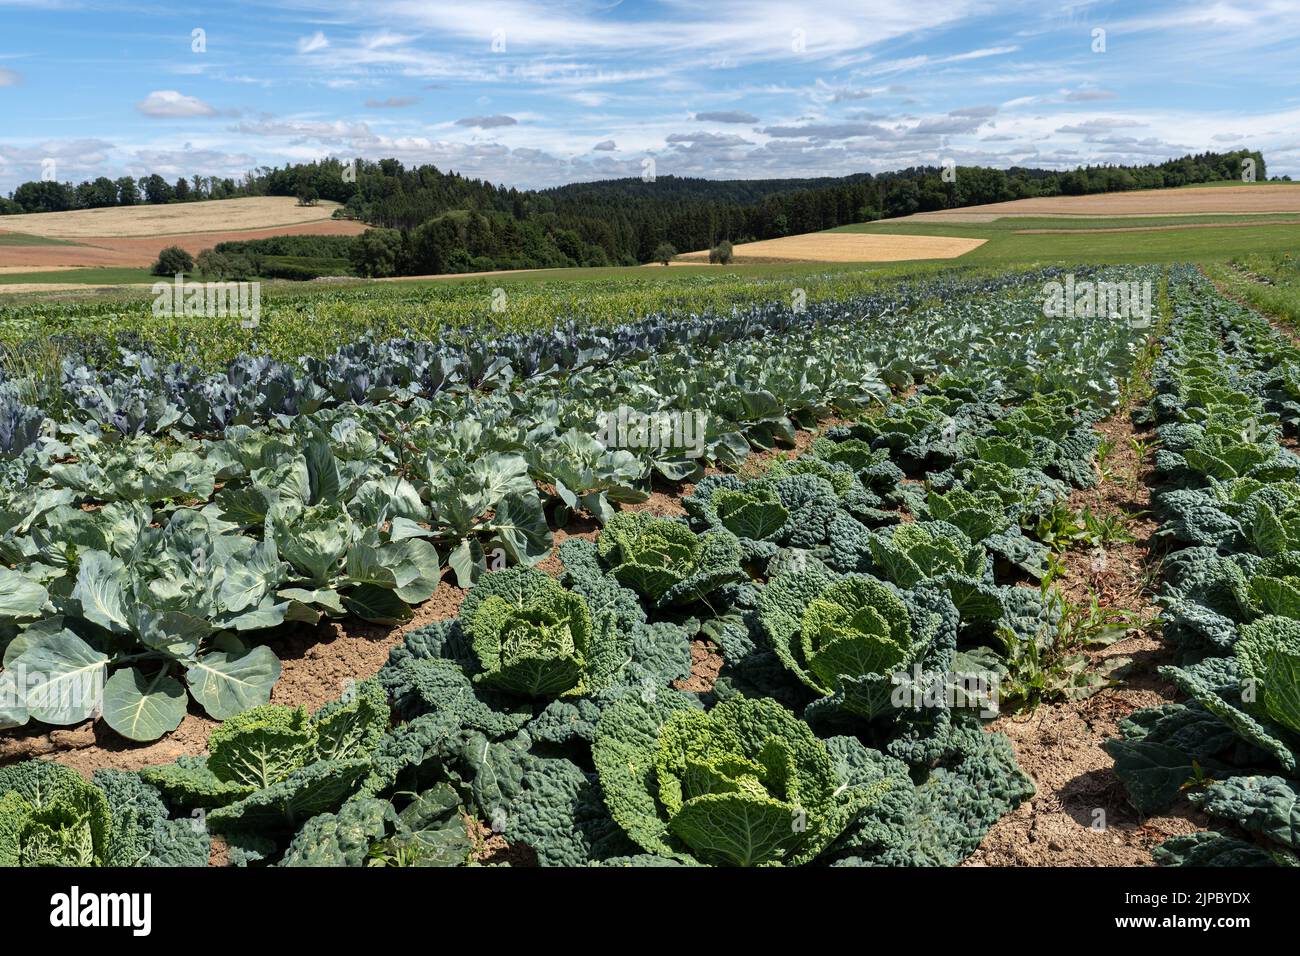 Rows of various cabbages in a field Stock Photo